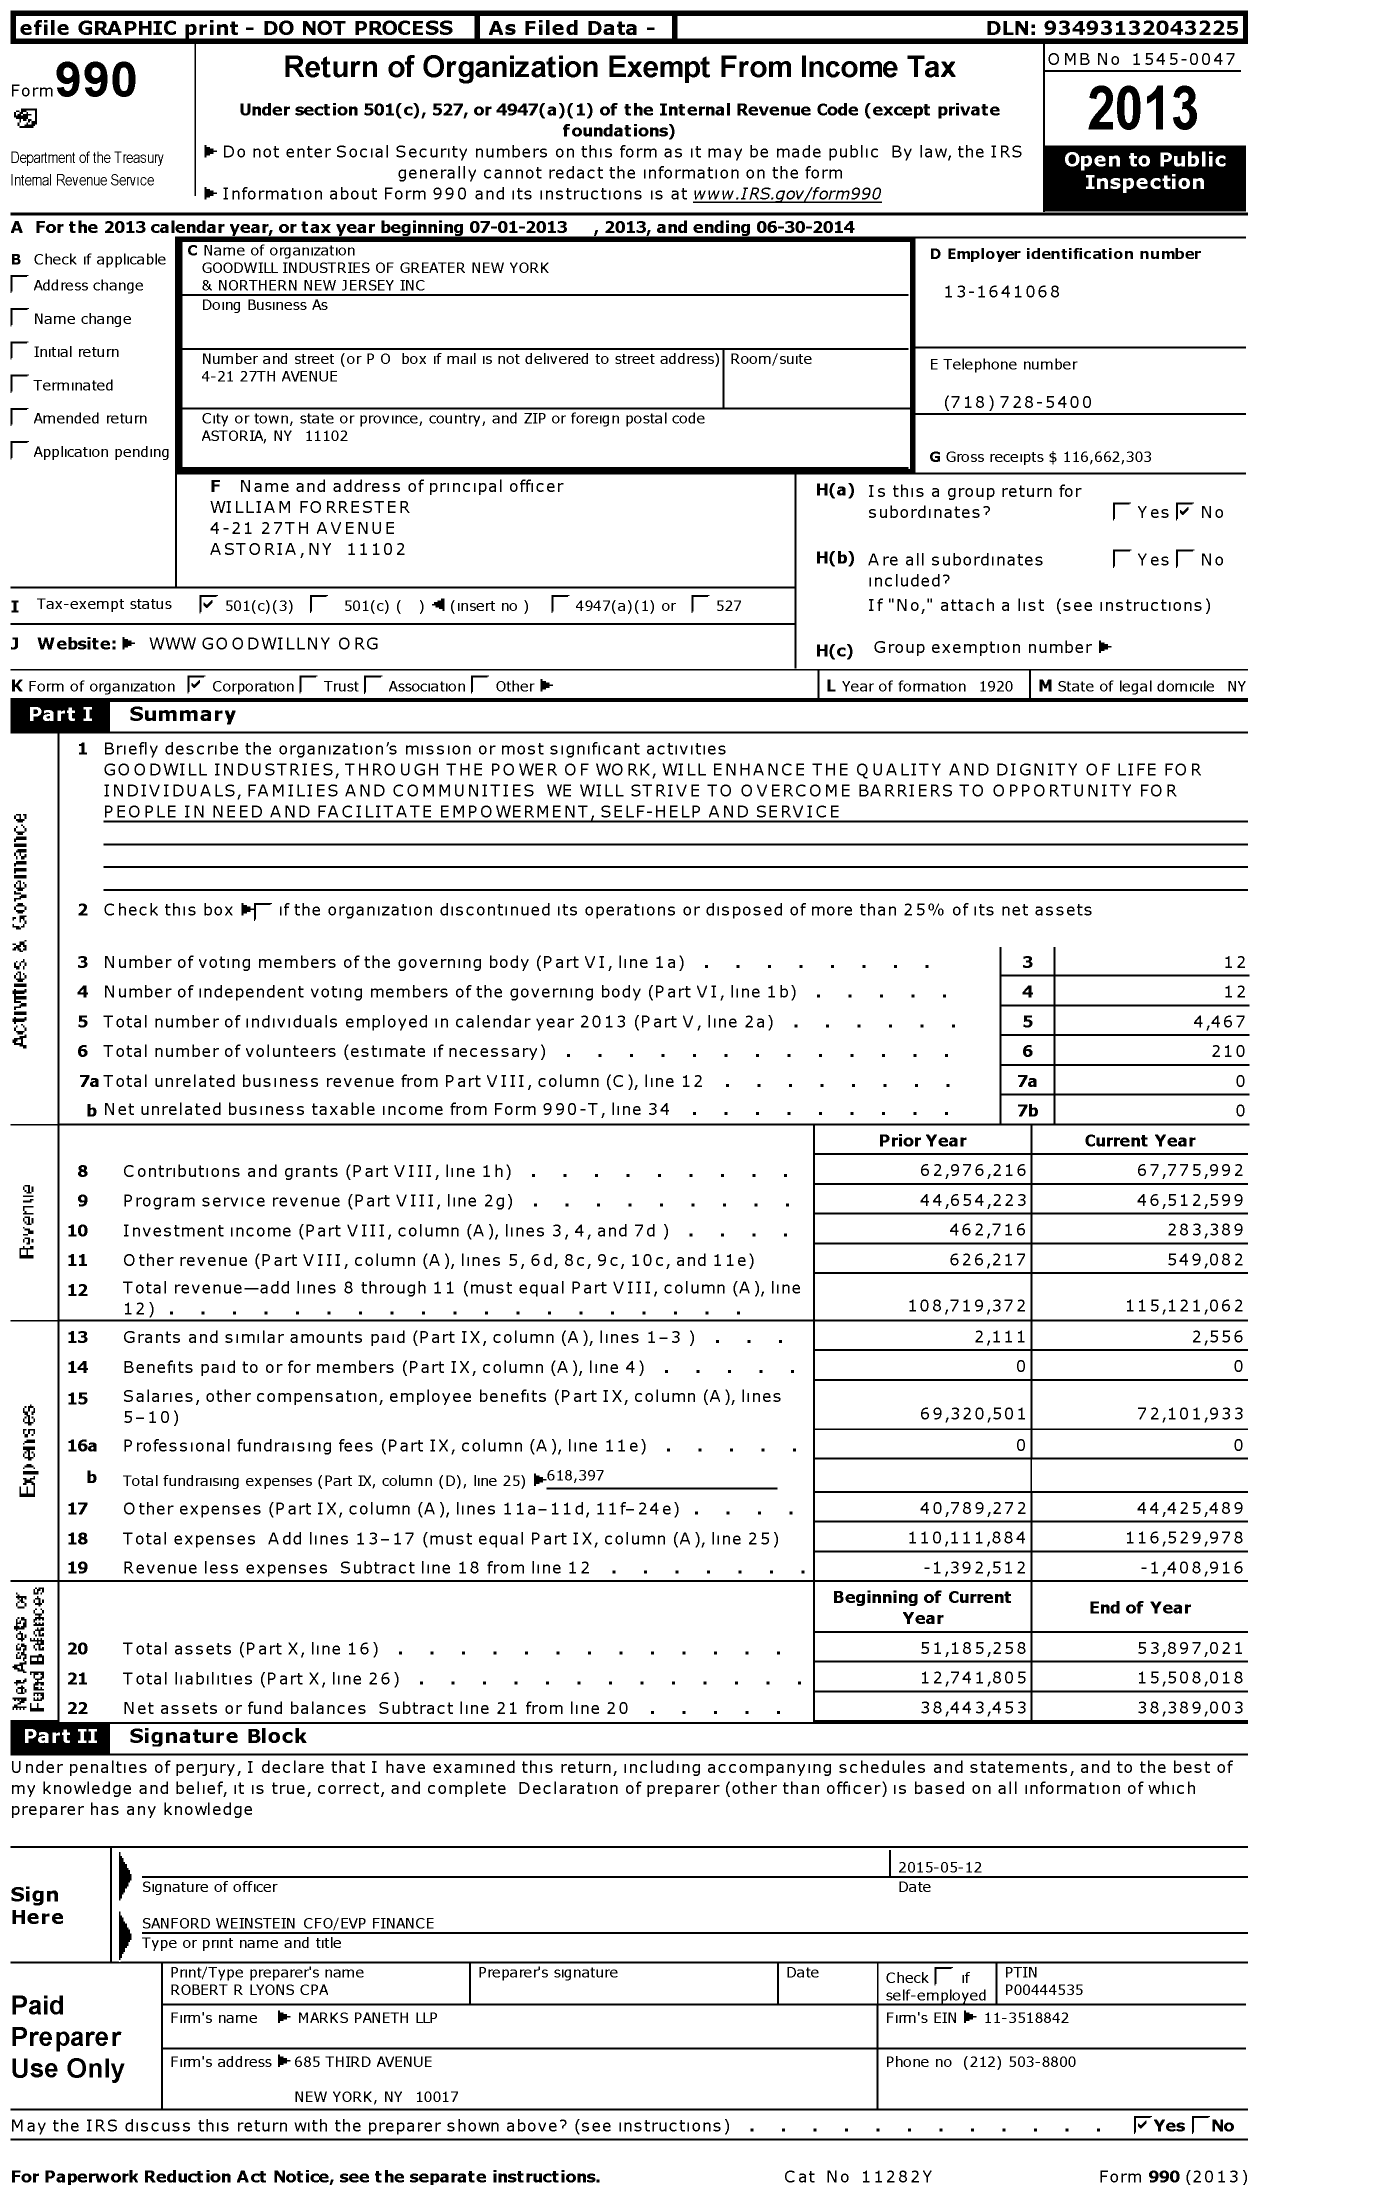 Image of first page of 2013 Form 990 for Goodwill Industries of Greater New York and Northern New Jersey